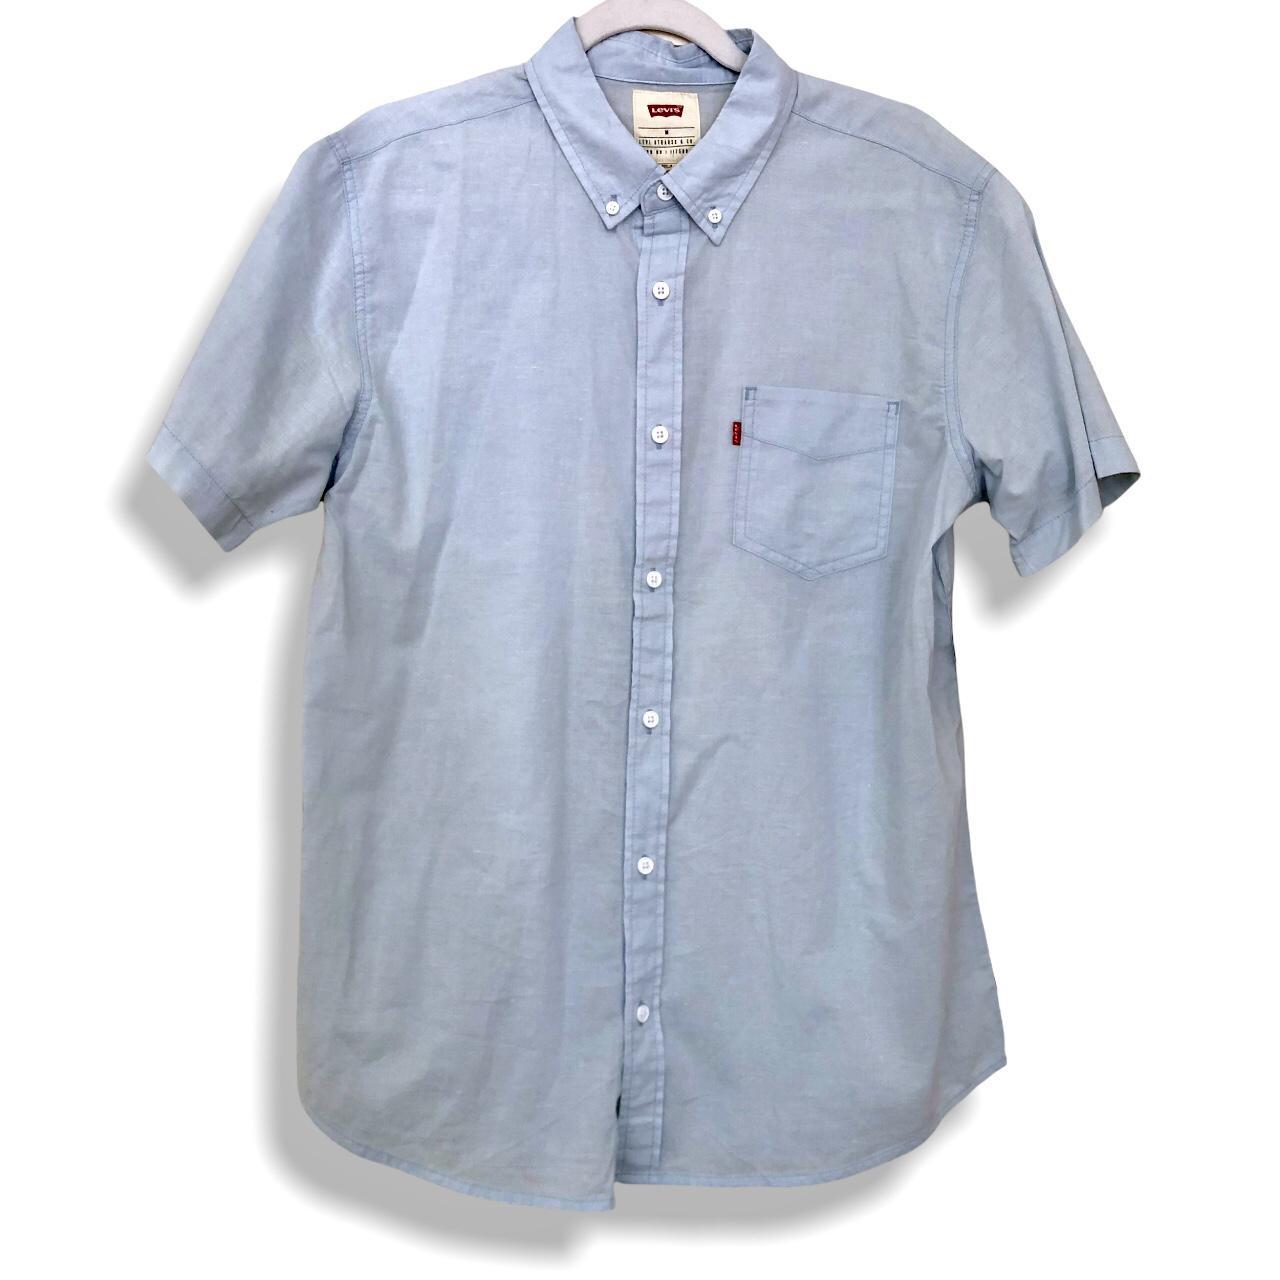 Product Image 1 - NWT Men's chambray Levi's button